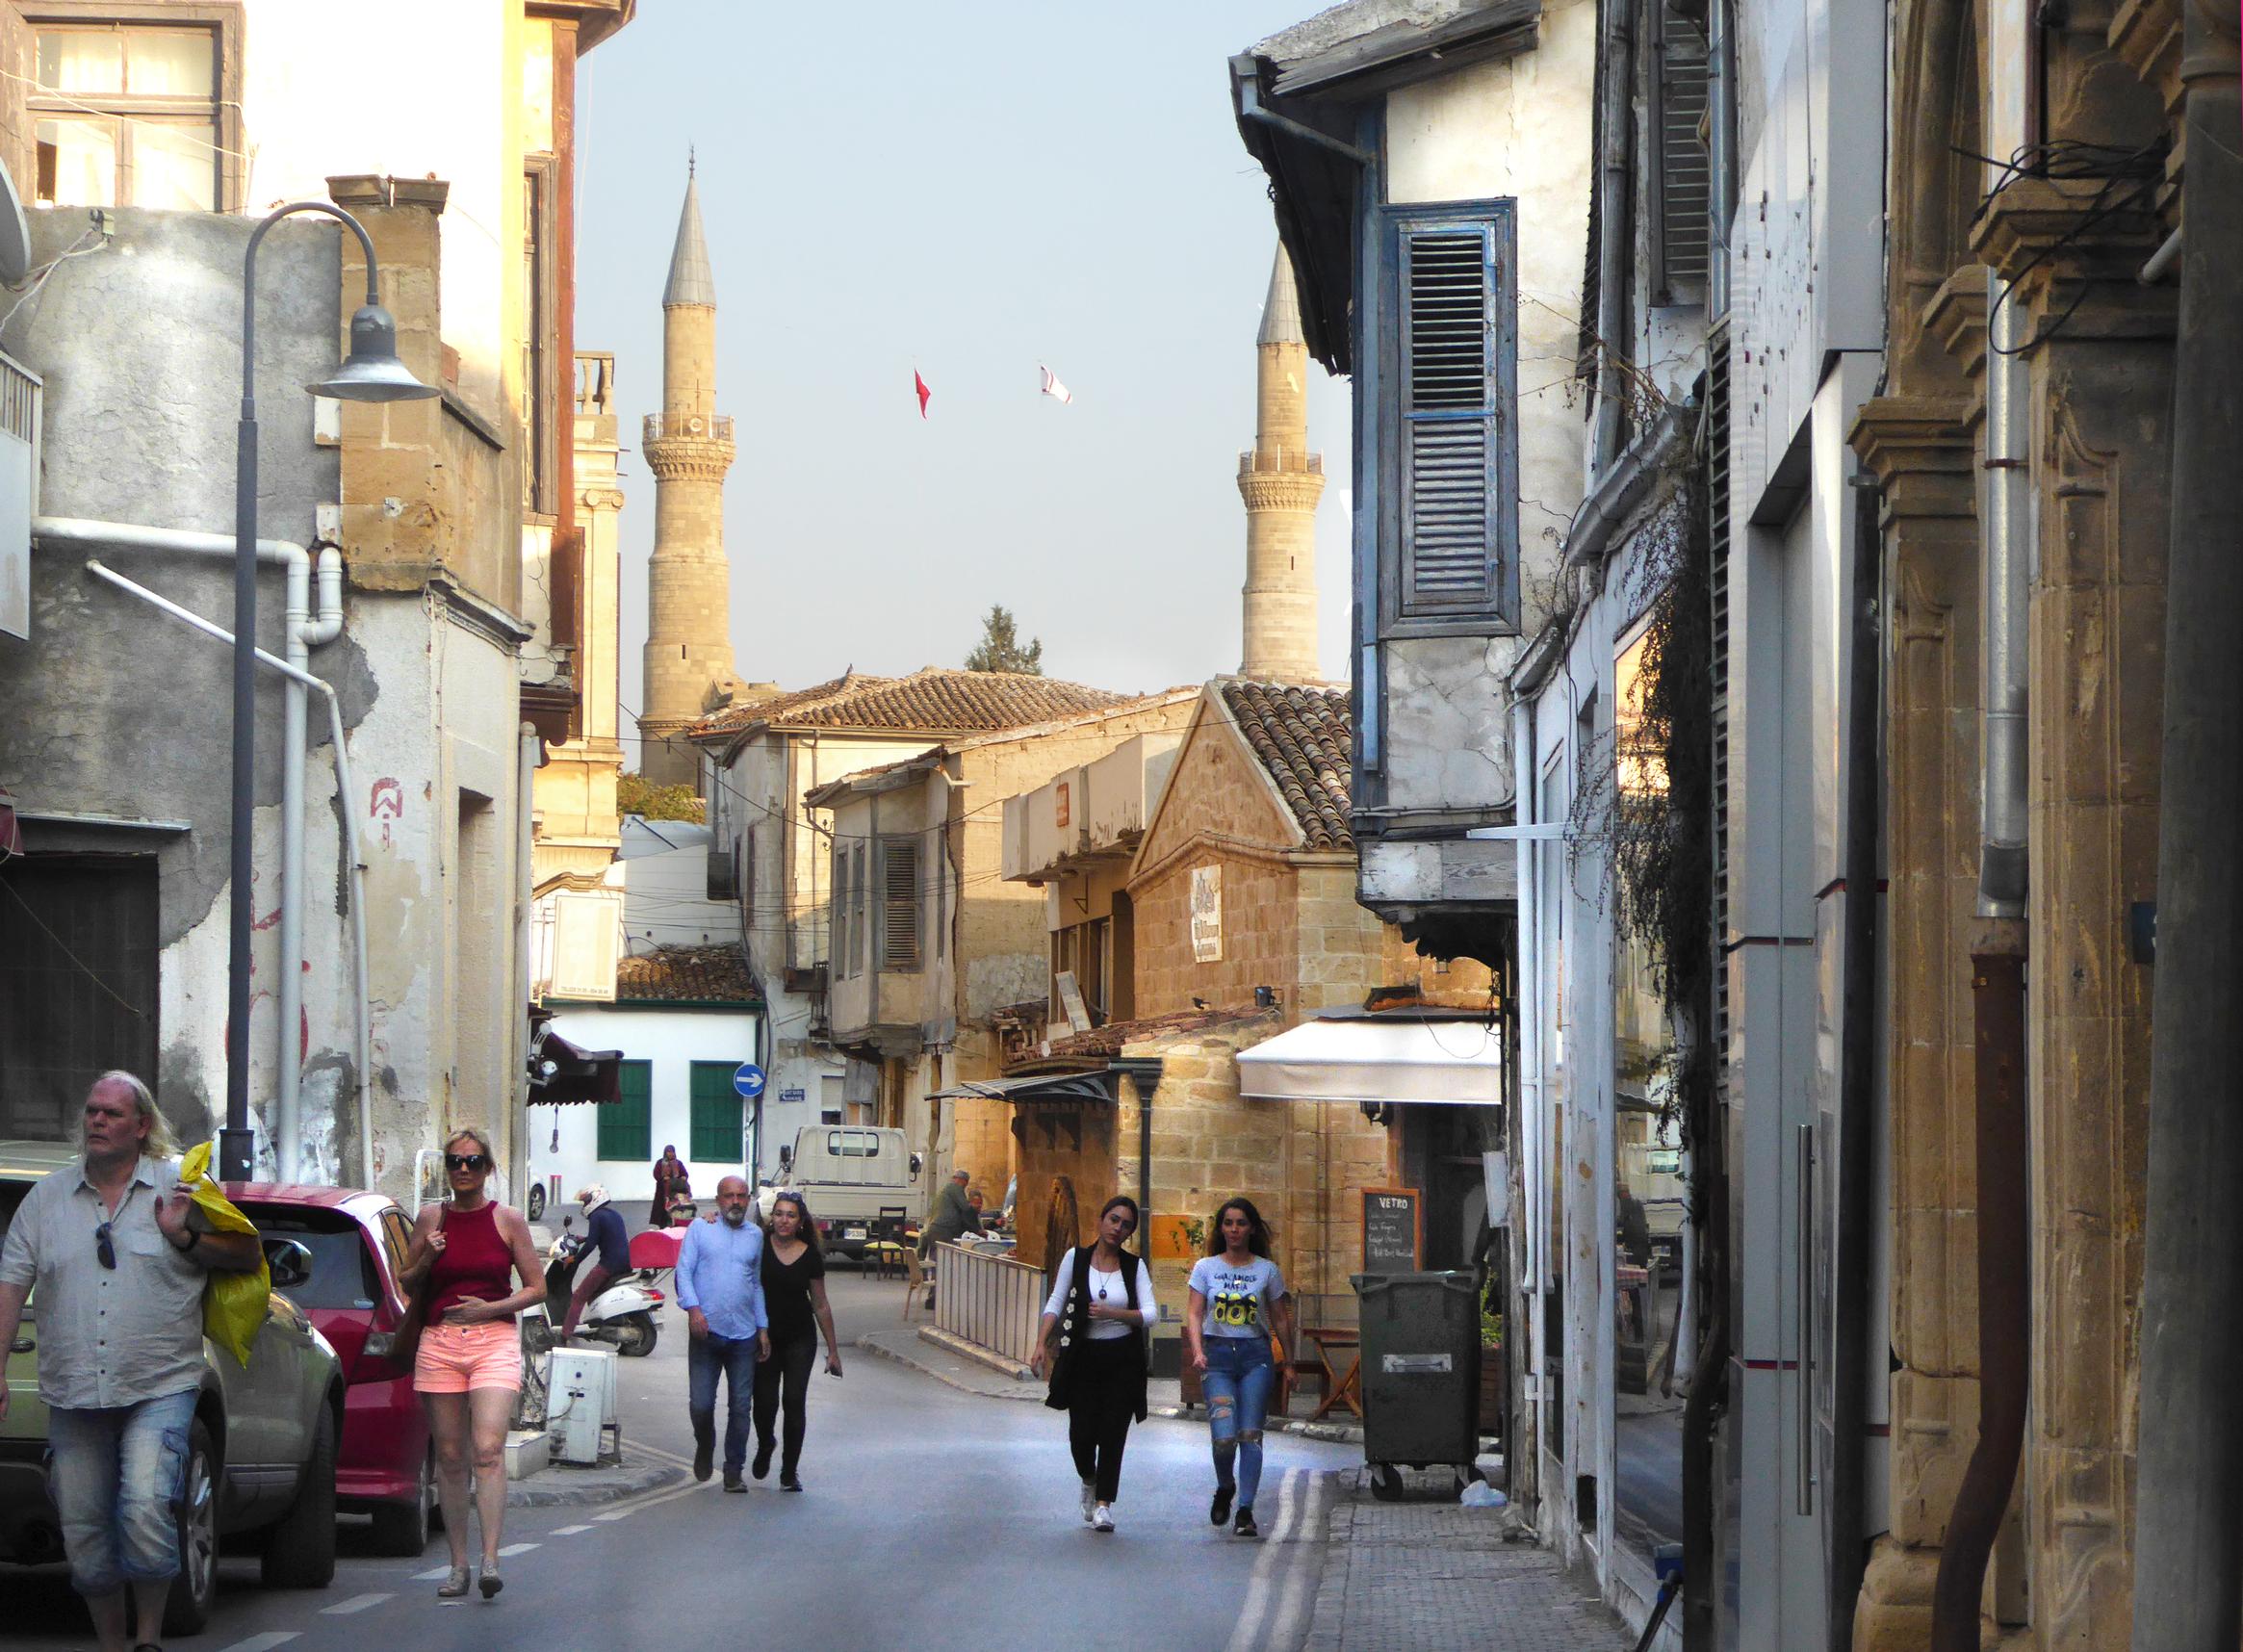 Nicosia in Cyprus, less retail-based and more ‘diverse, fun and resilient’